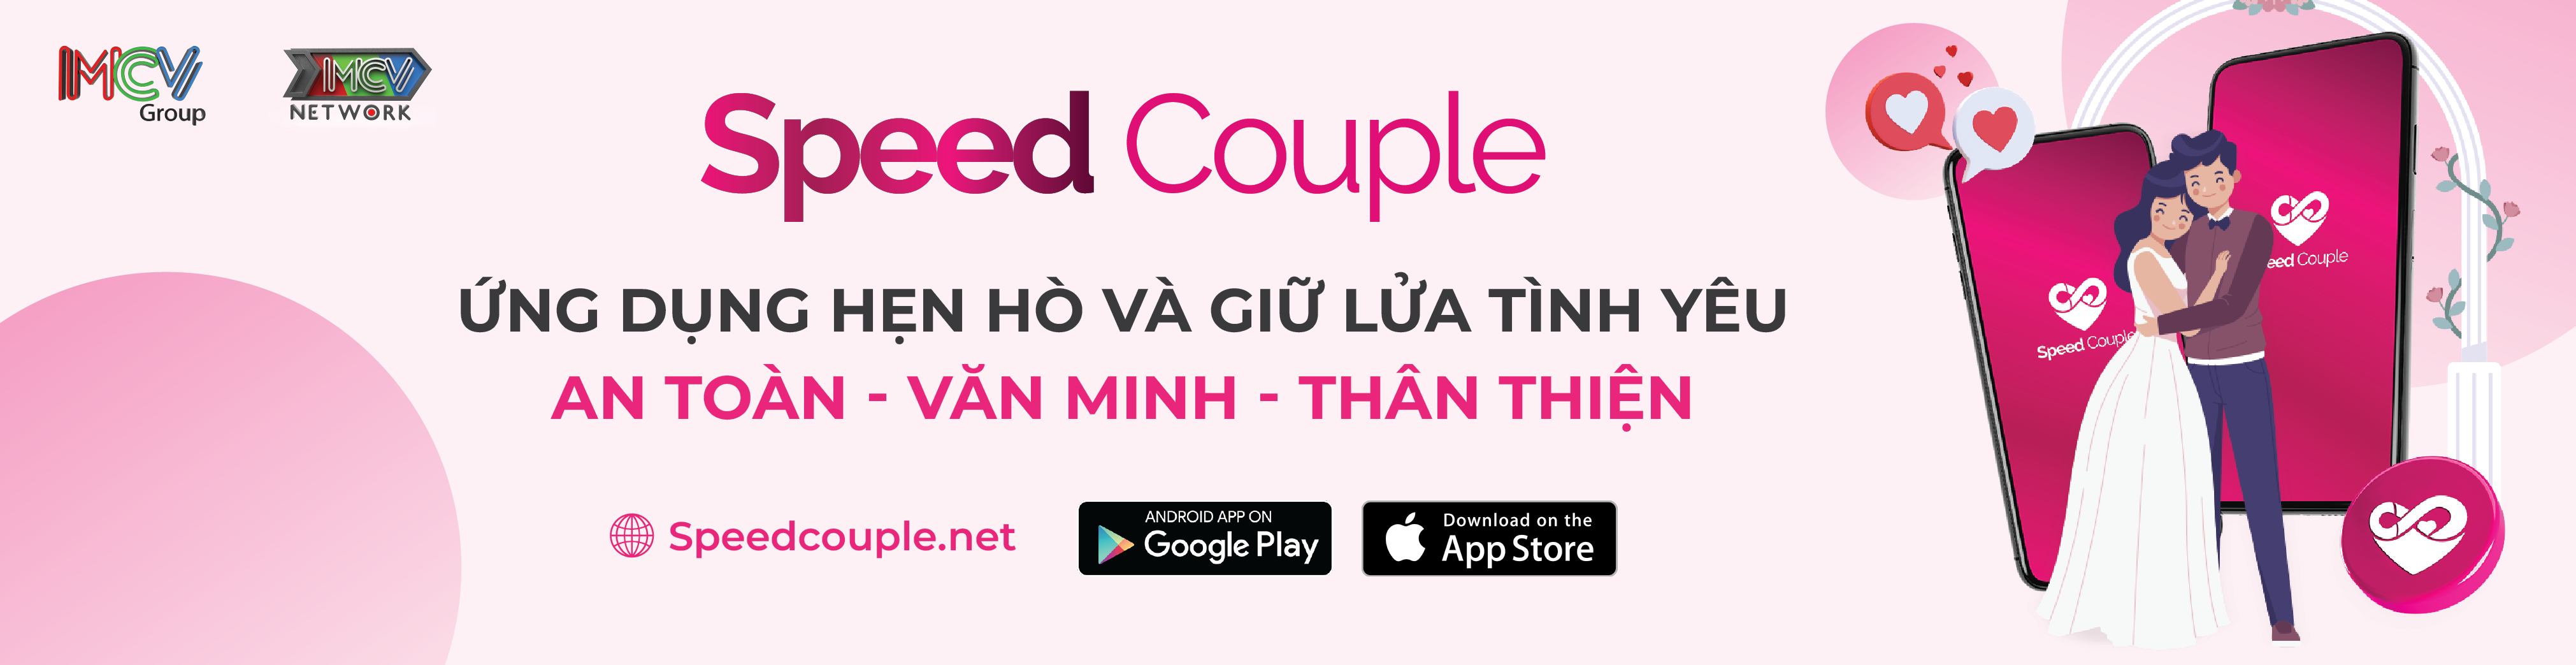 speed-couple-banner-03-21-970x250png